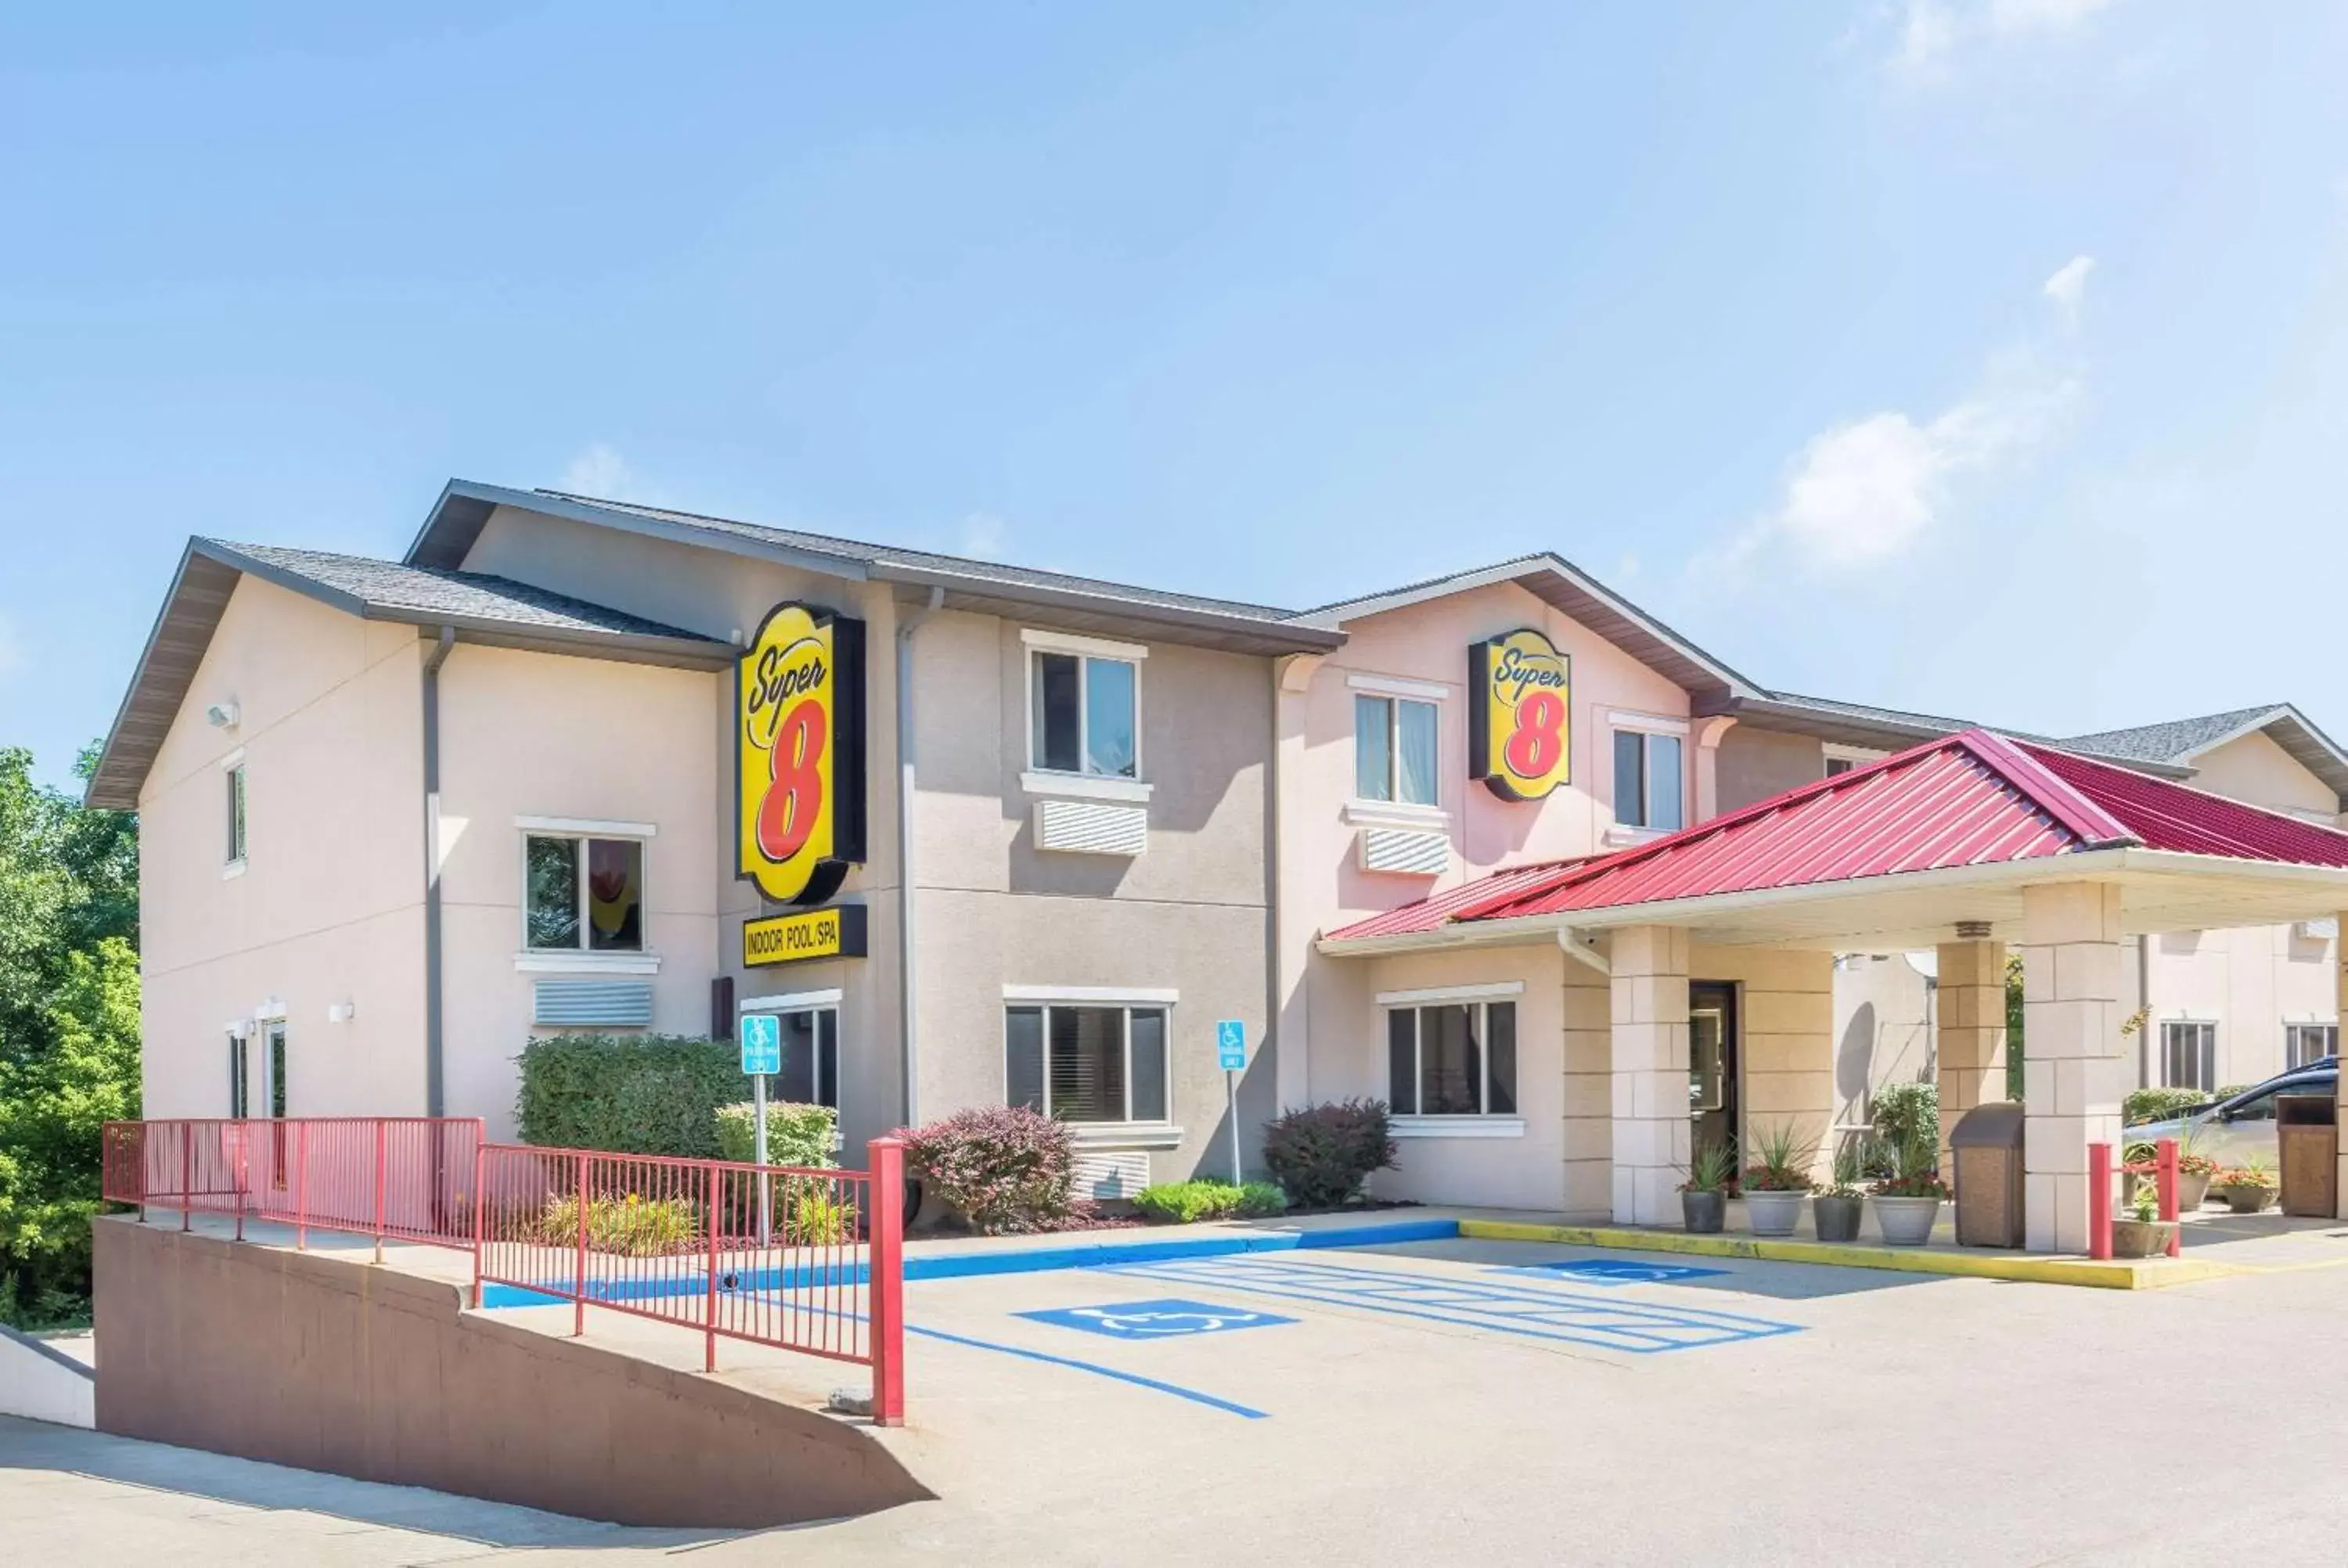 Property Building in Super 8 by Wyndham Bloomington, Indiana